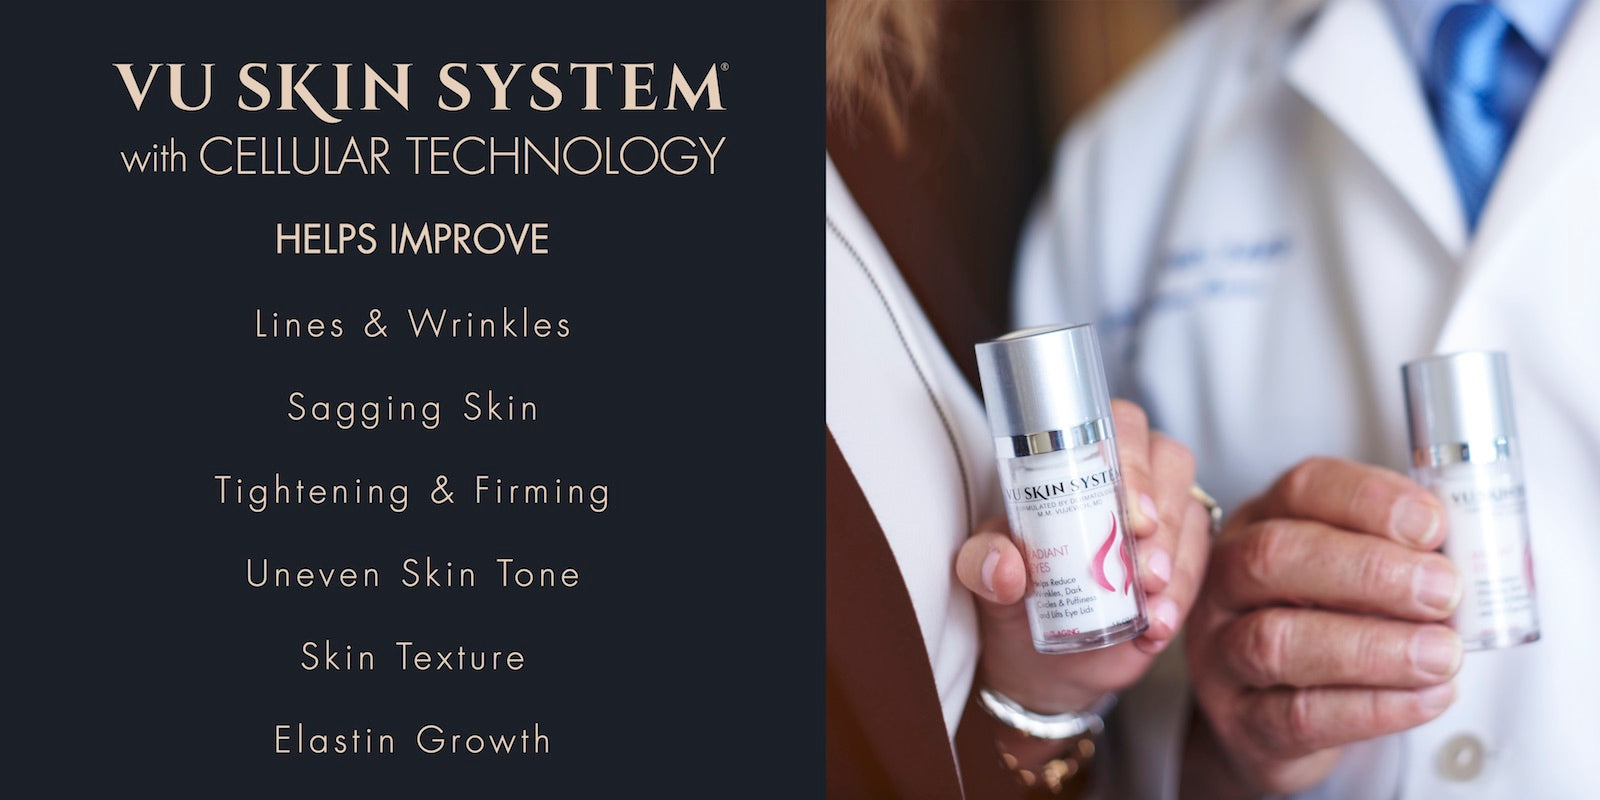 vu skin system with cellular technology helps improve lines and wrinkles, sagging skin, tightening and firming, uneven skin tone, skin texture, elastin growth